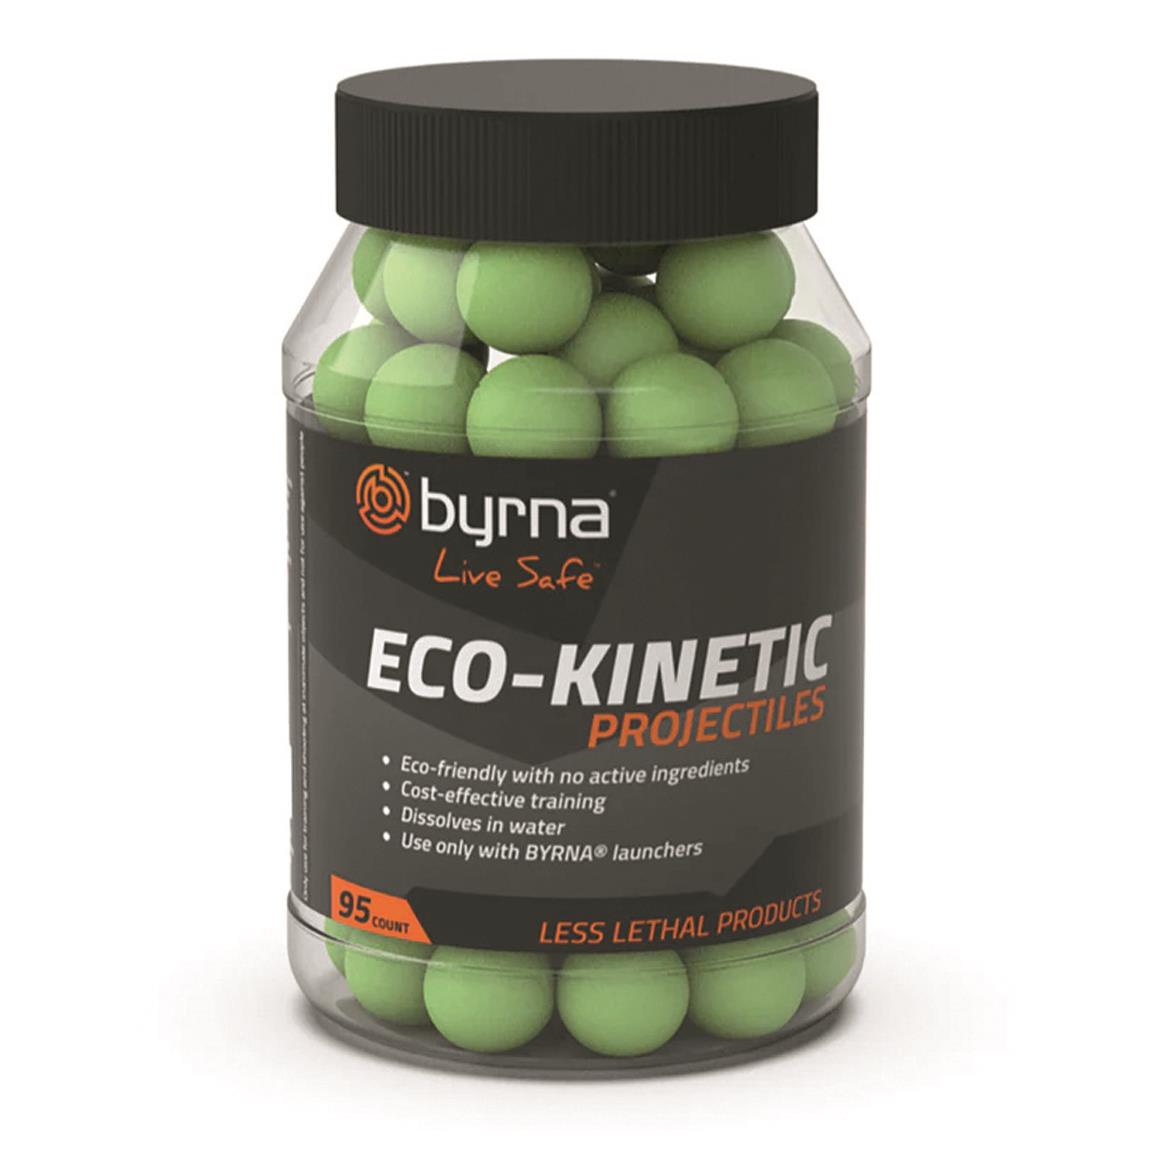 Byrna Projectiles, Eco-Kinetic, 95 Count, Green